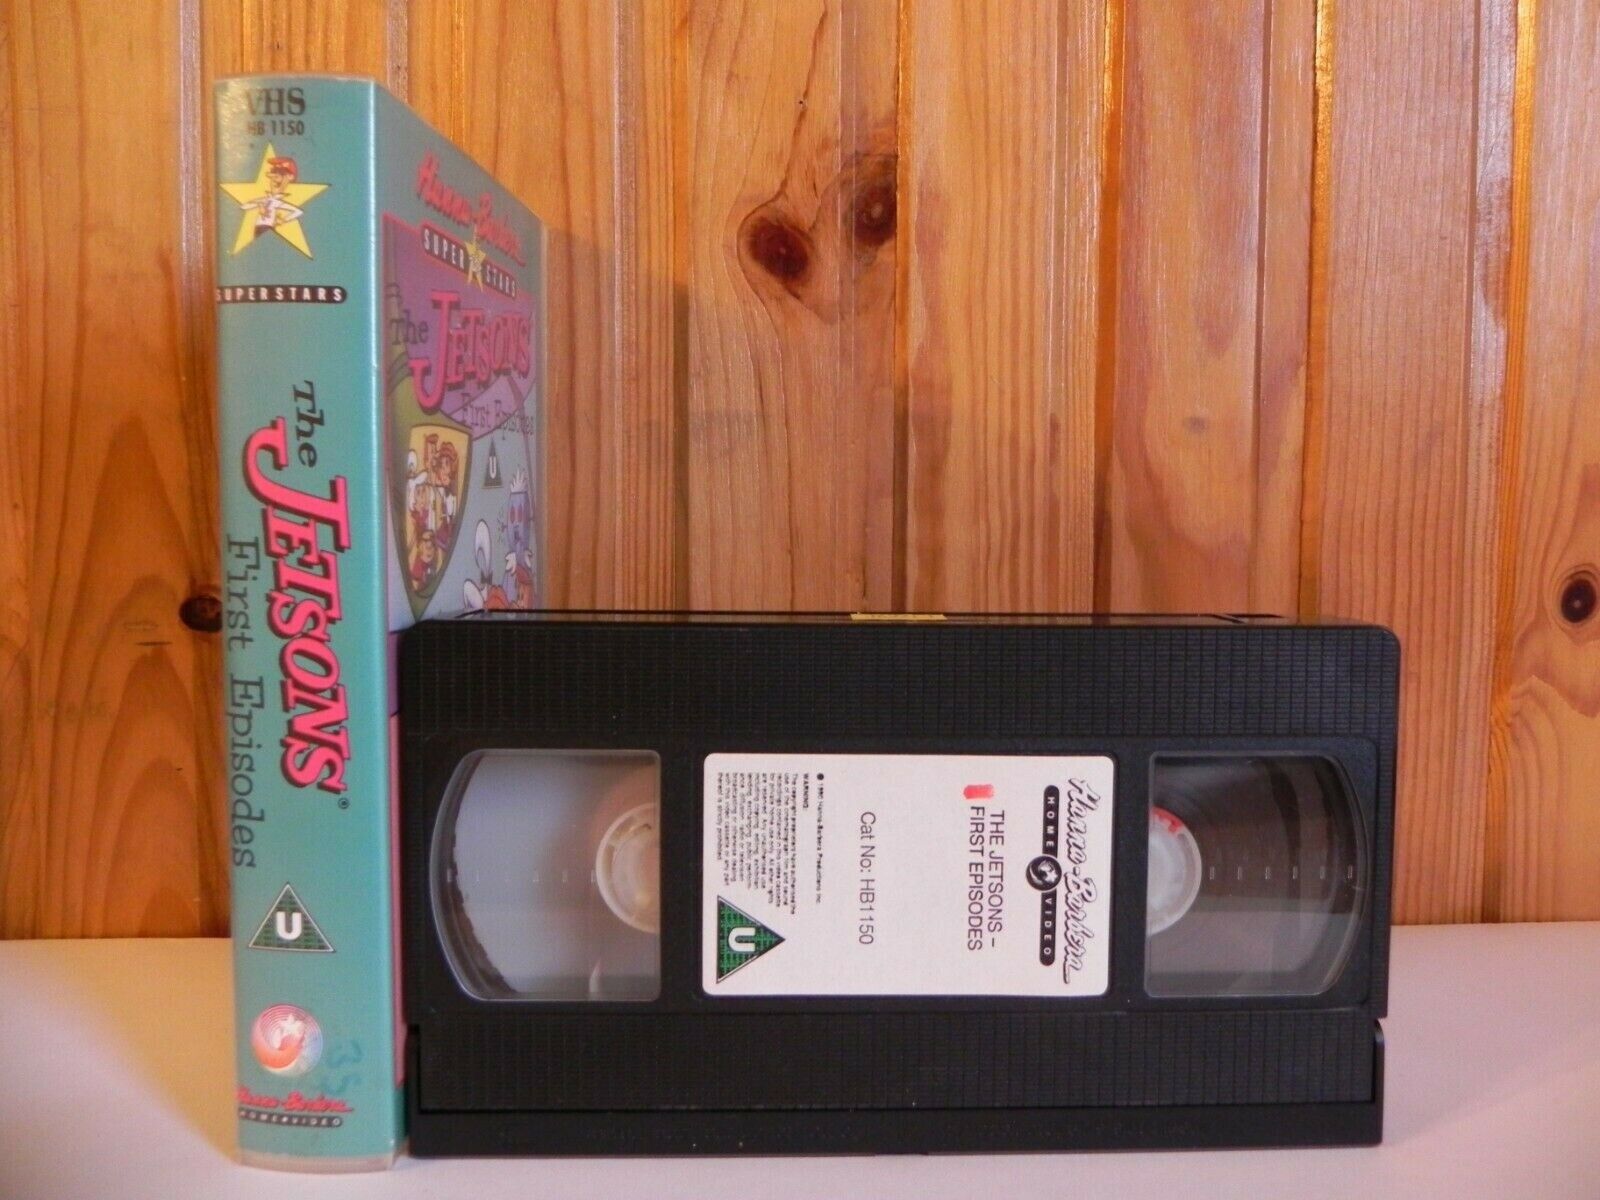 KIDS VIDEO - THE JETSONS - FIRST EVER EPISODES - HANNAH BARBERA ANIMATION - VHS-